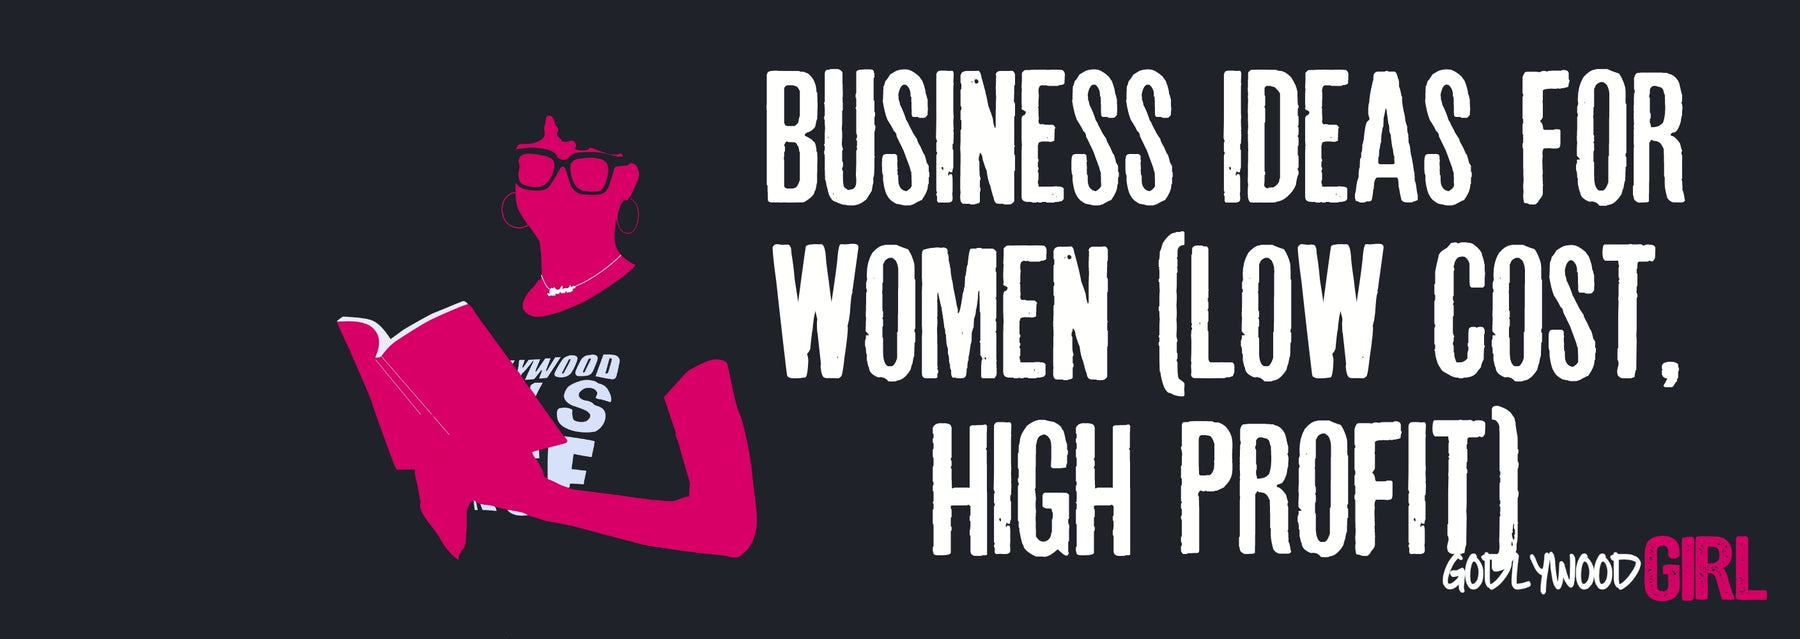 BUSINESS IDEAS FOR WOMEN (low cost high profit)